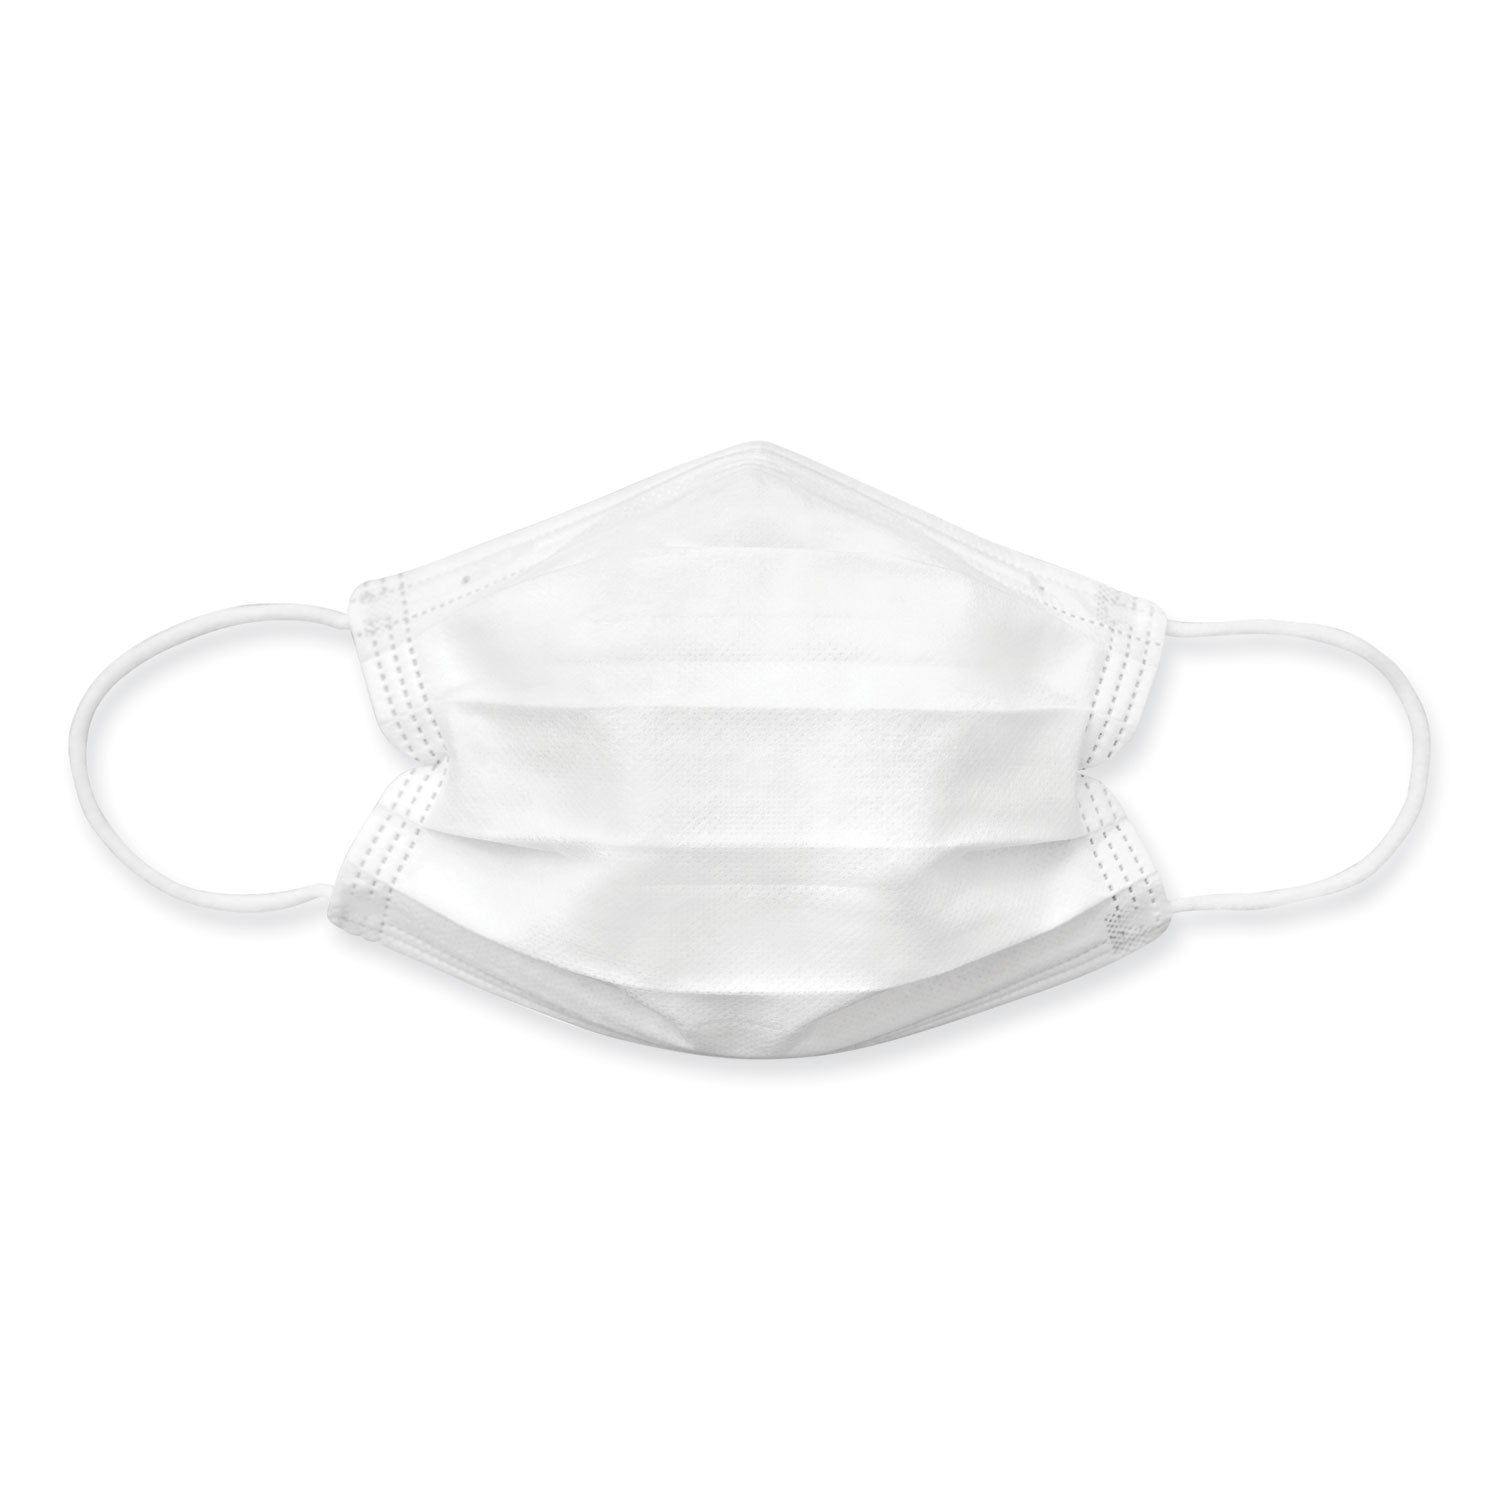 earloop-disposable-face-mask-3-ply-non-woven-large-7-pack_irs590040 - 3